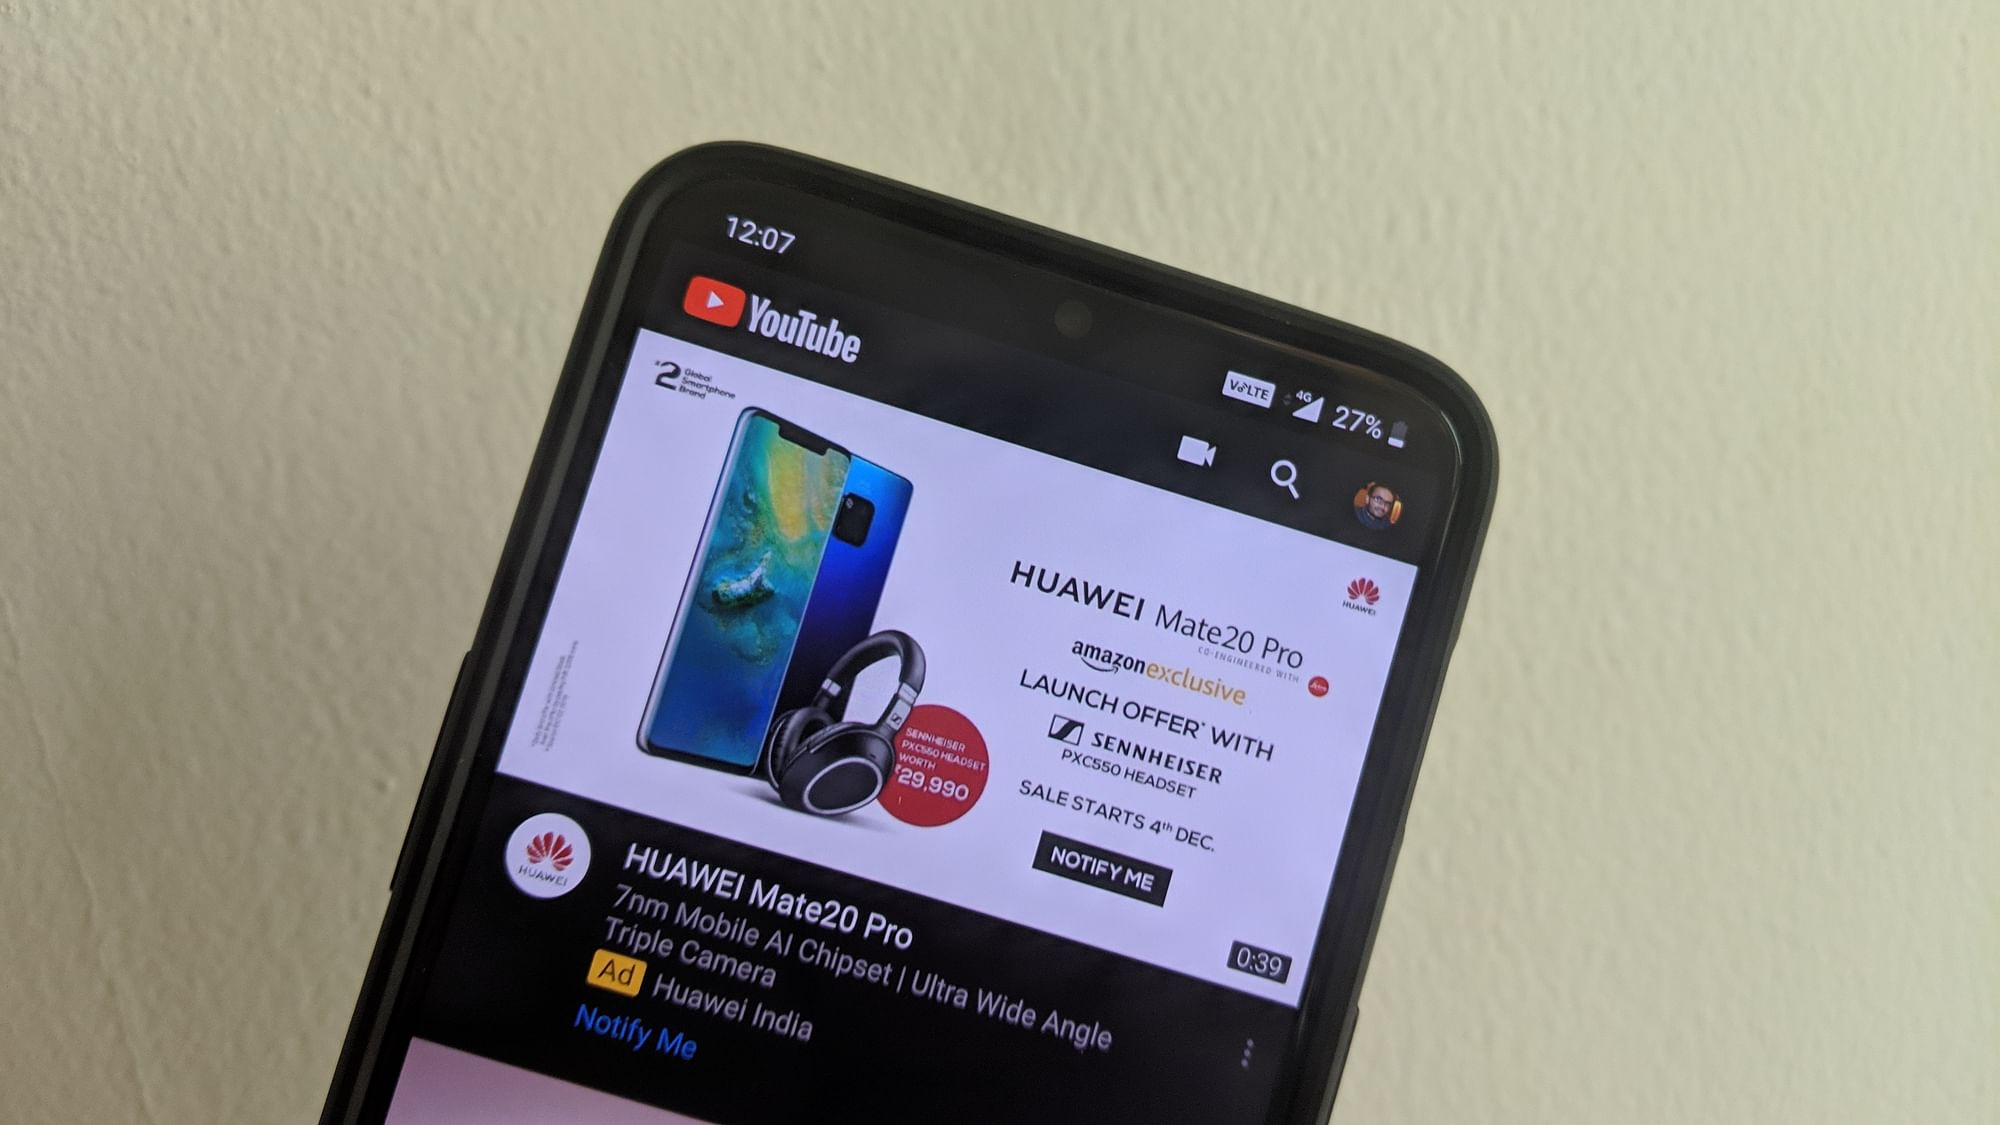 YouTube Music is available in 43 countries as of now.